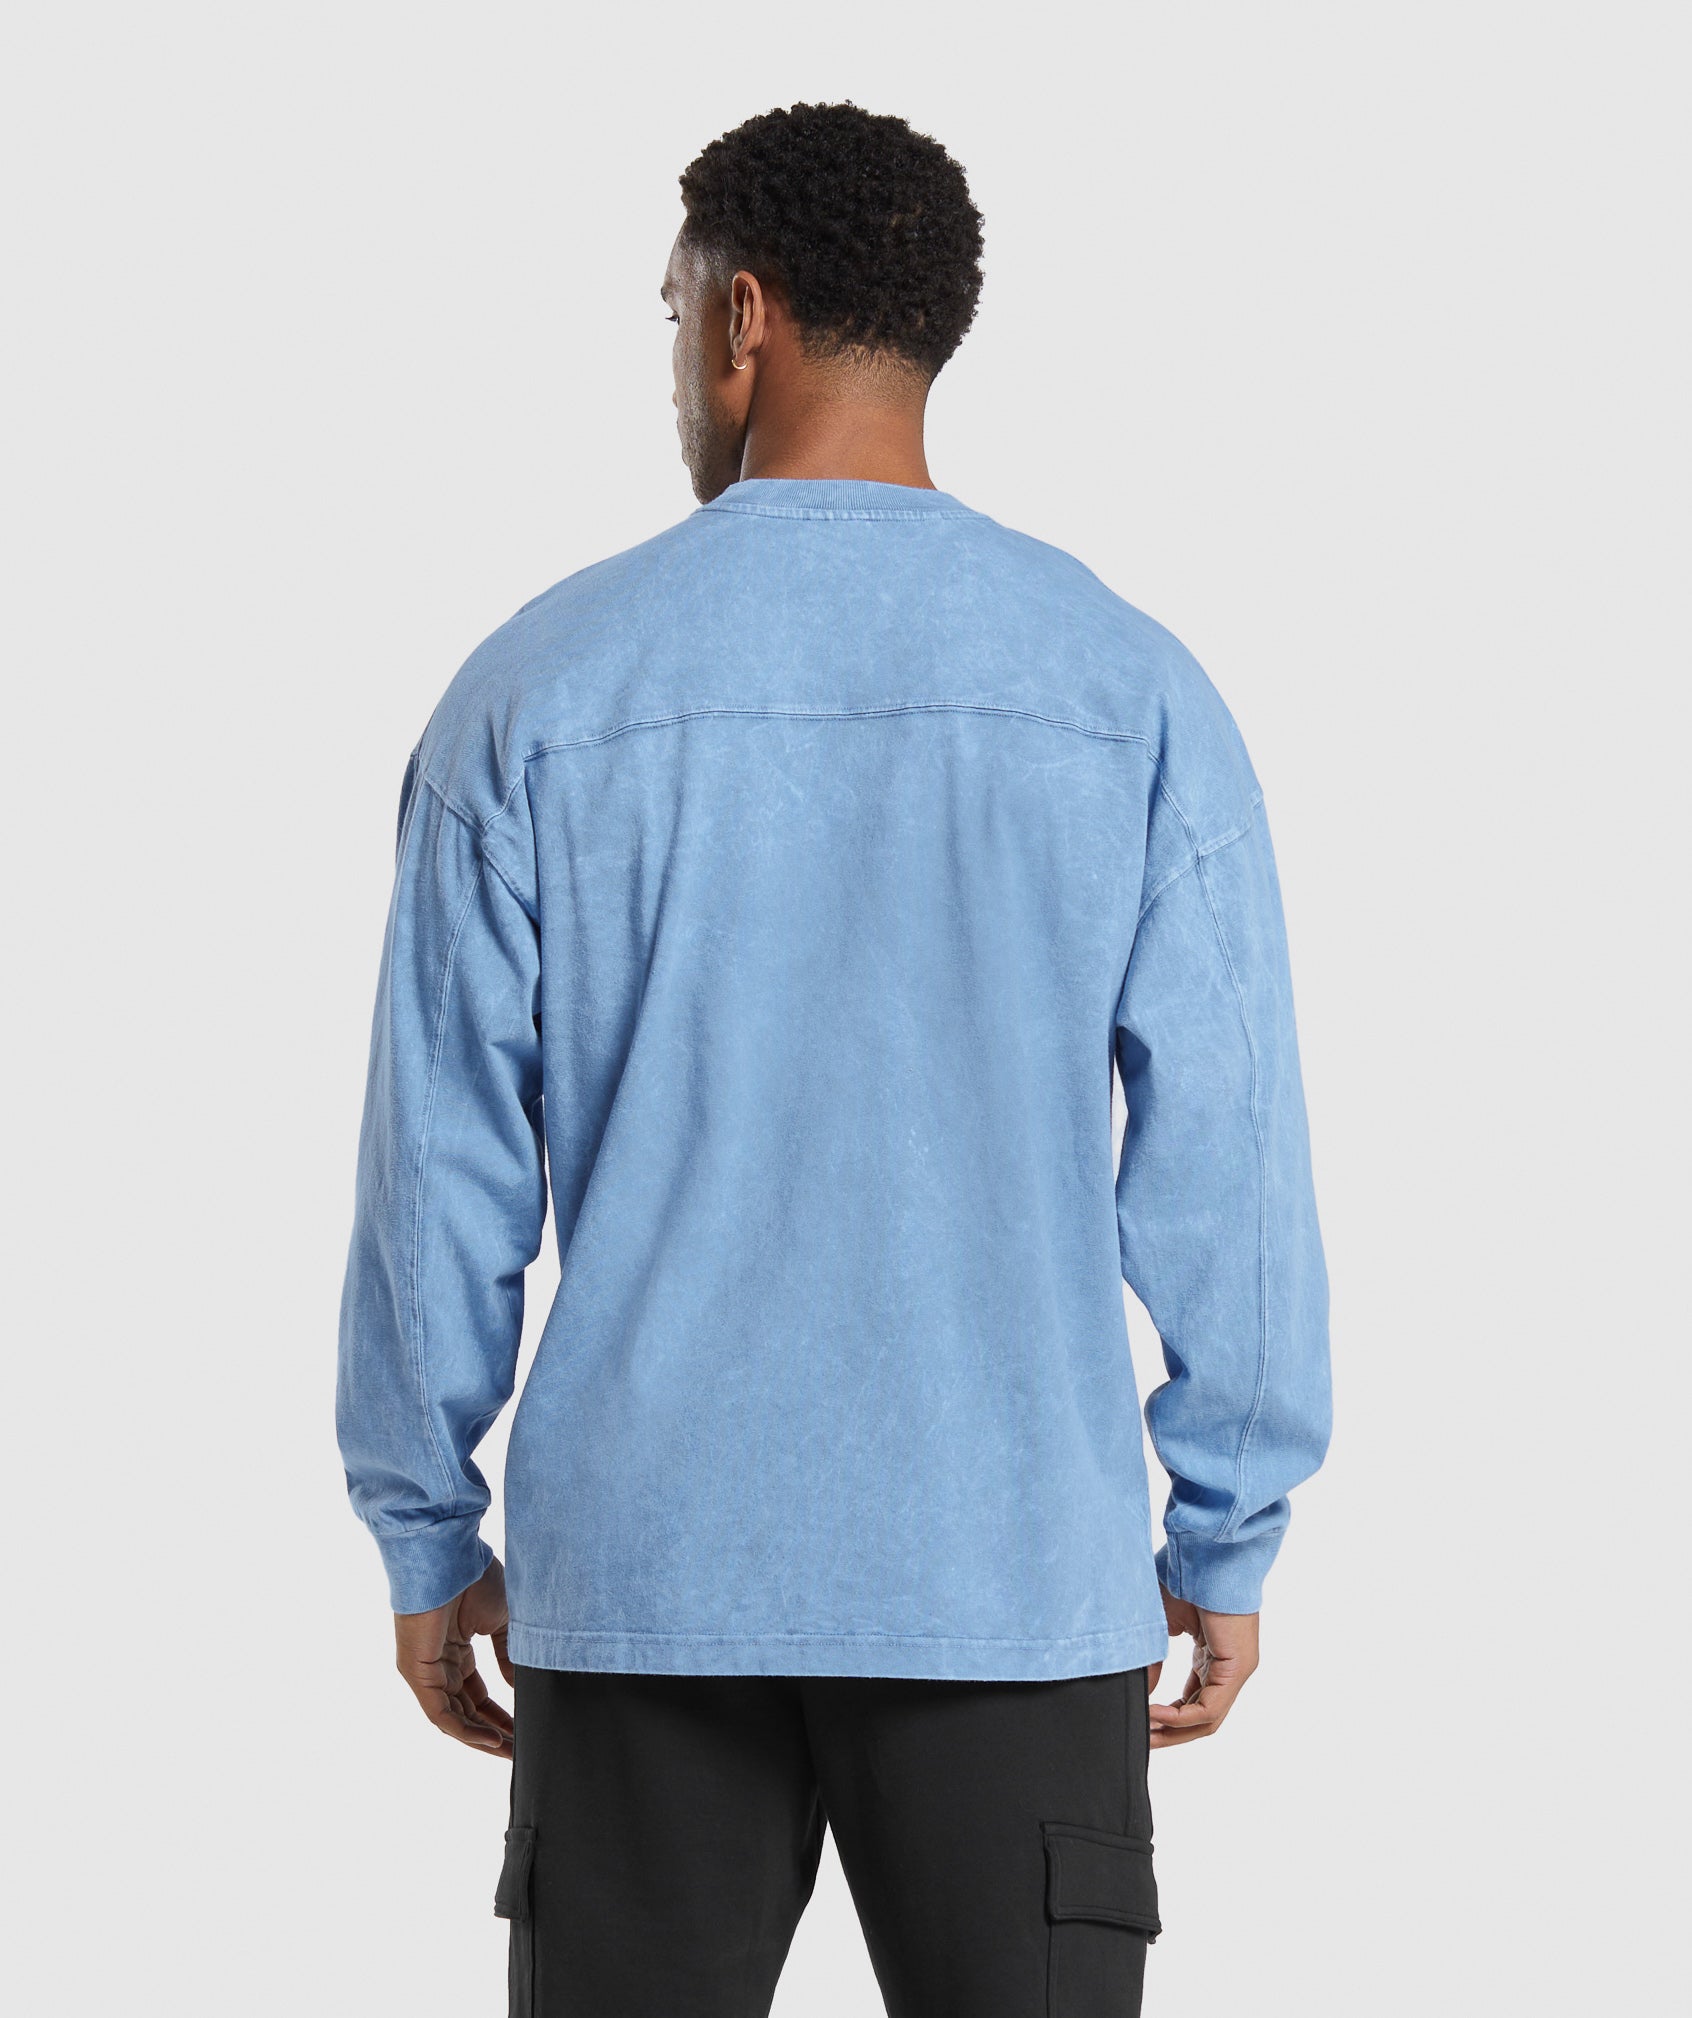 Rest Day Washed Long Sleeve T-Shirt in Faded Blue - view 2